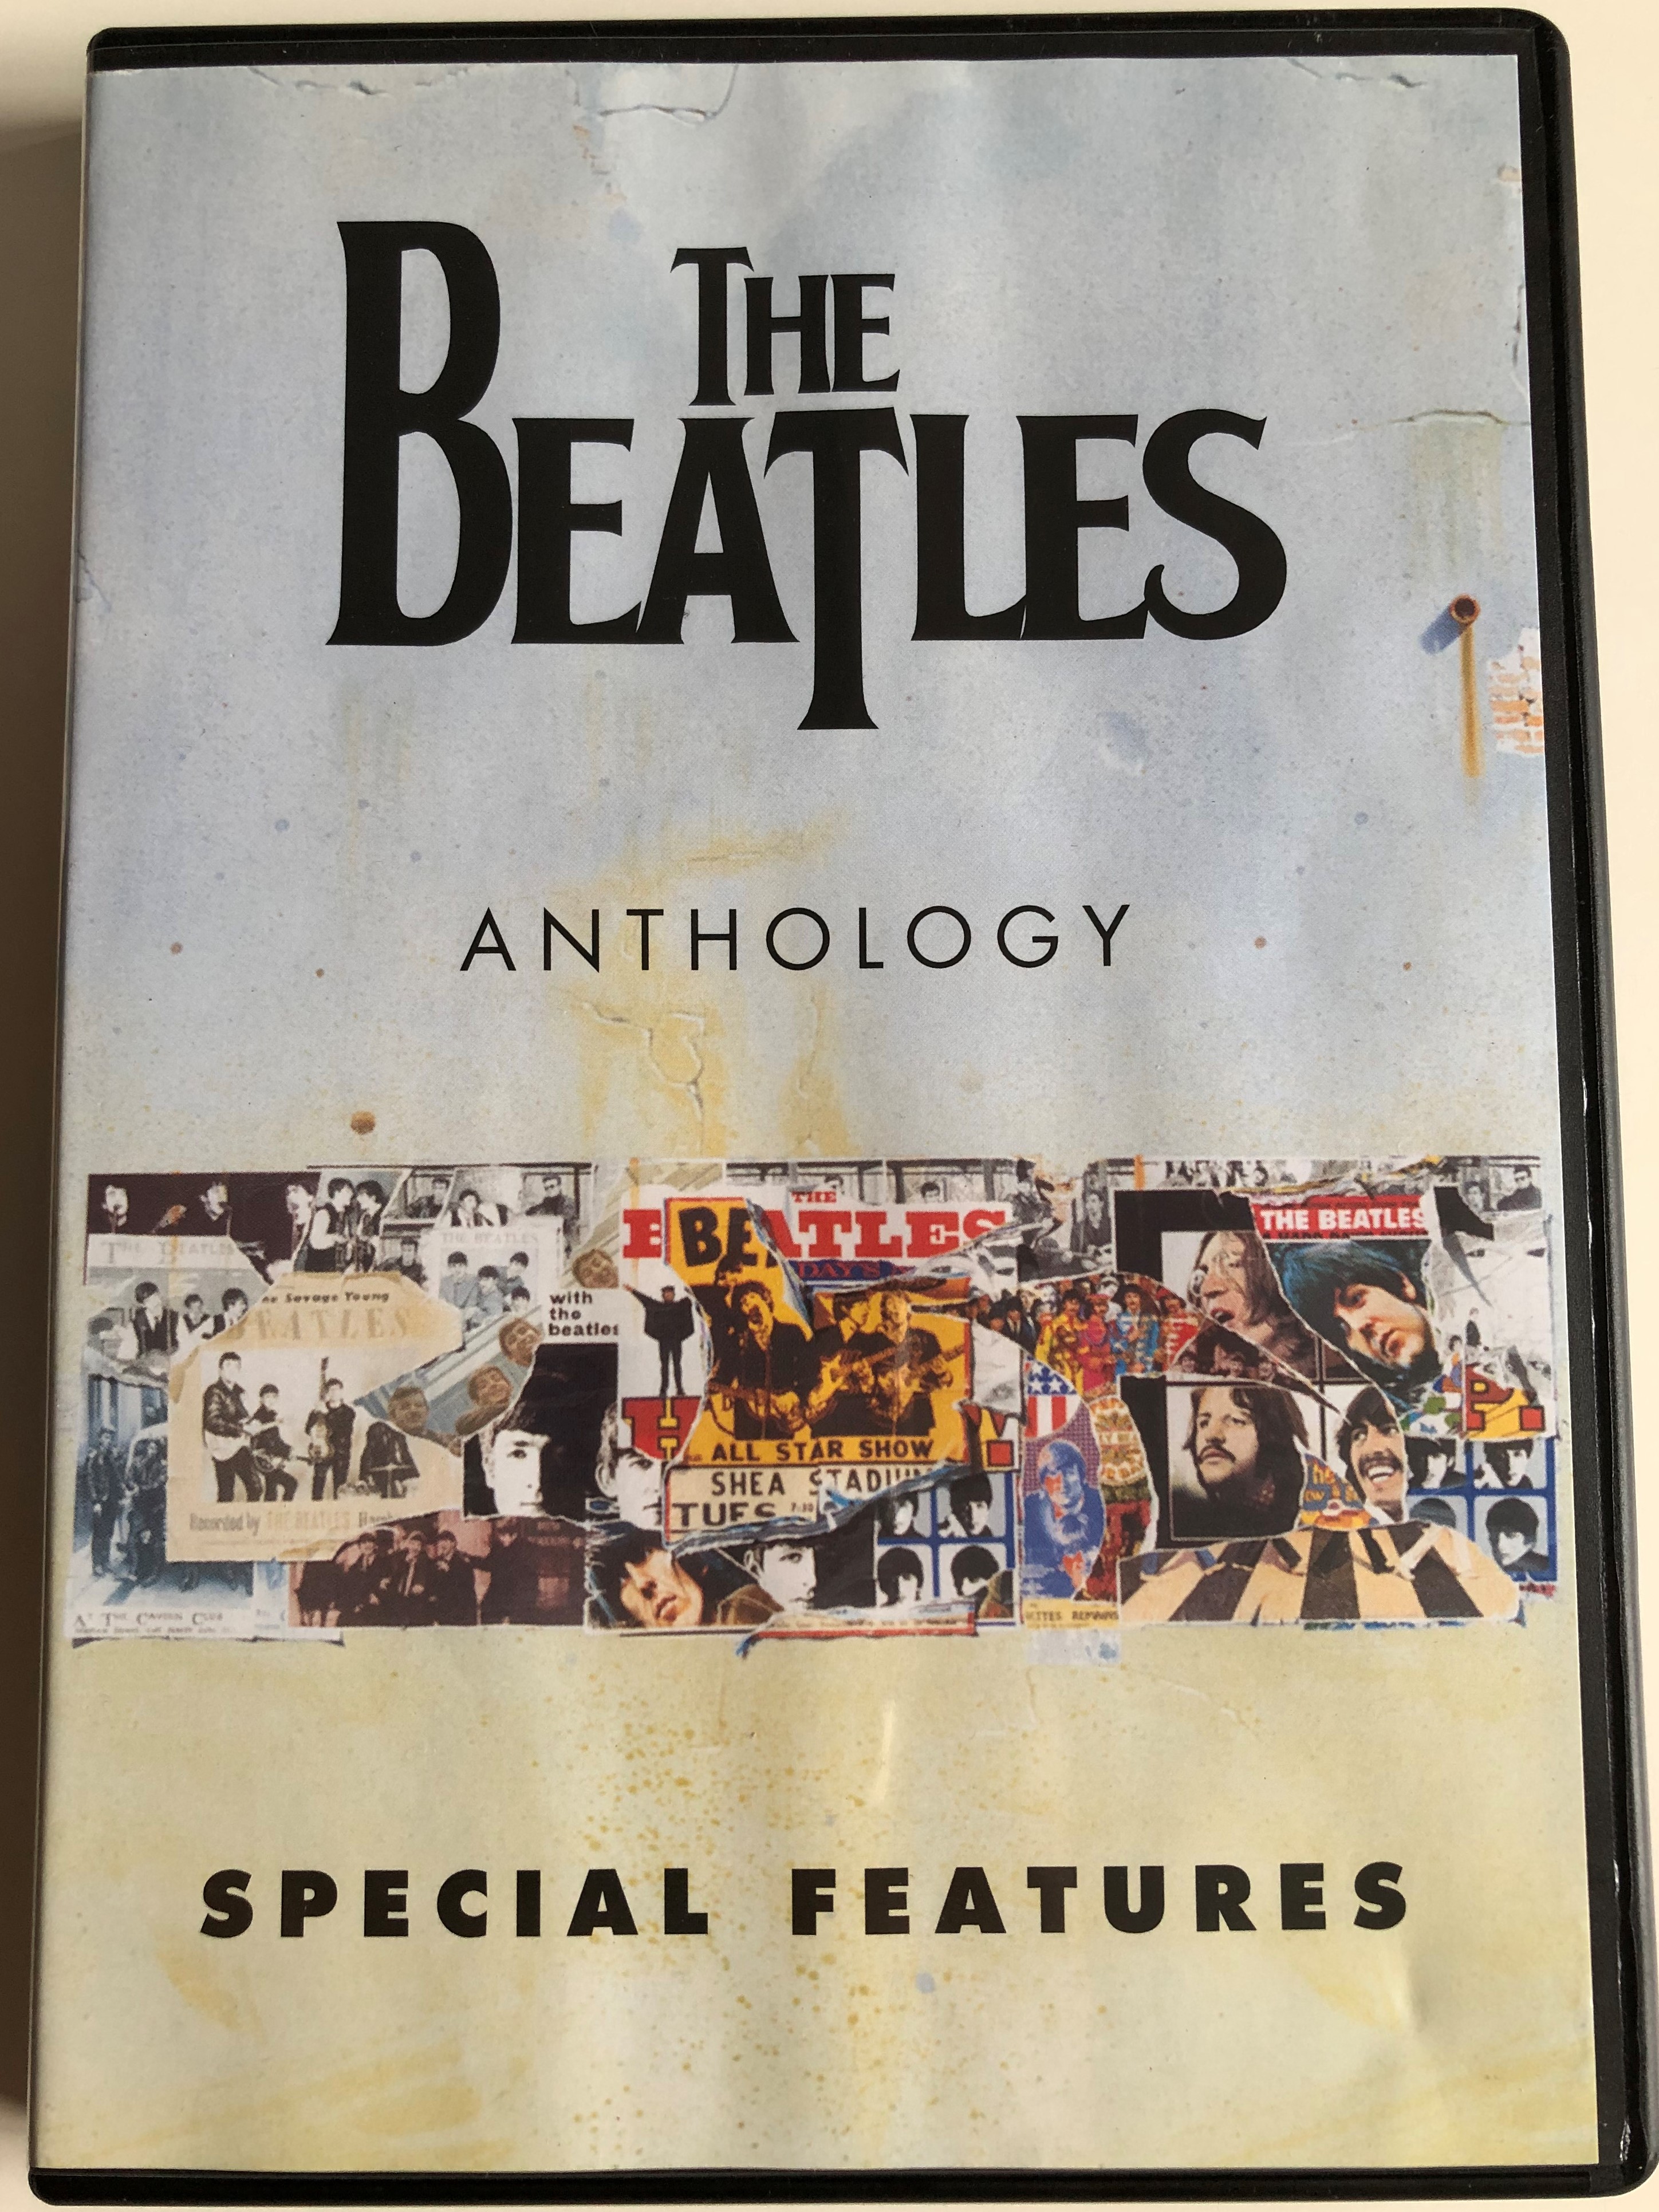 The Beatles Anthology DVD Special Features 1.JPG